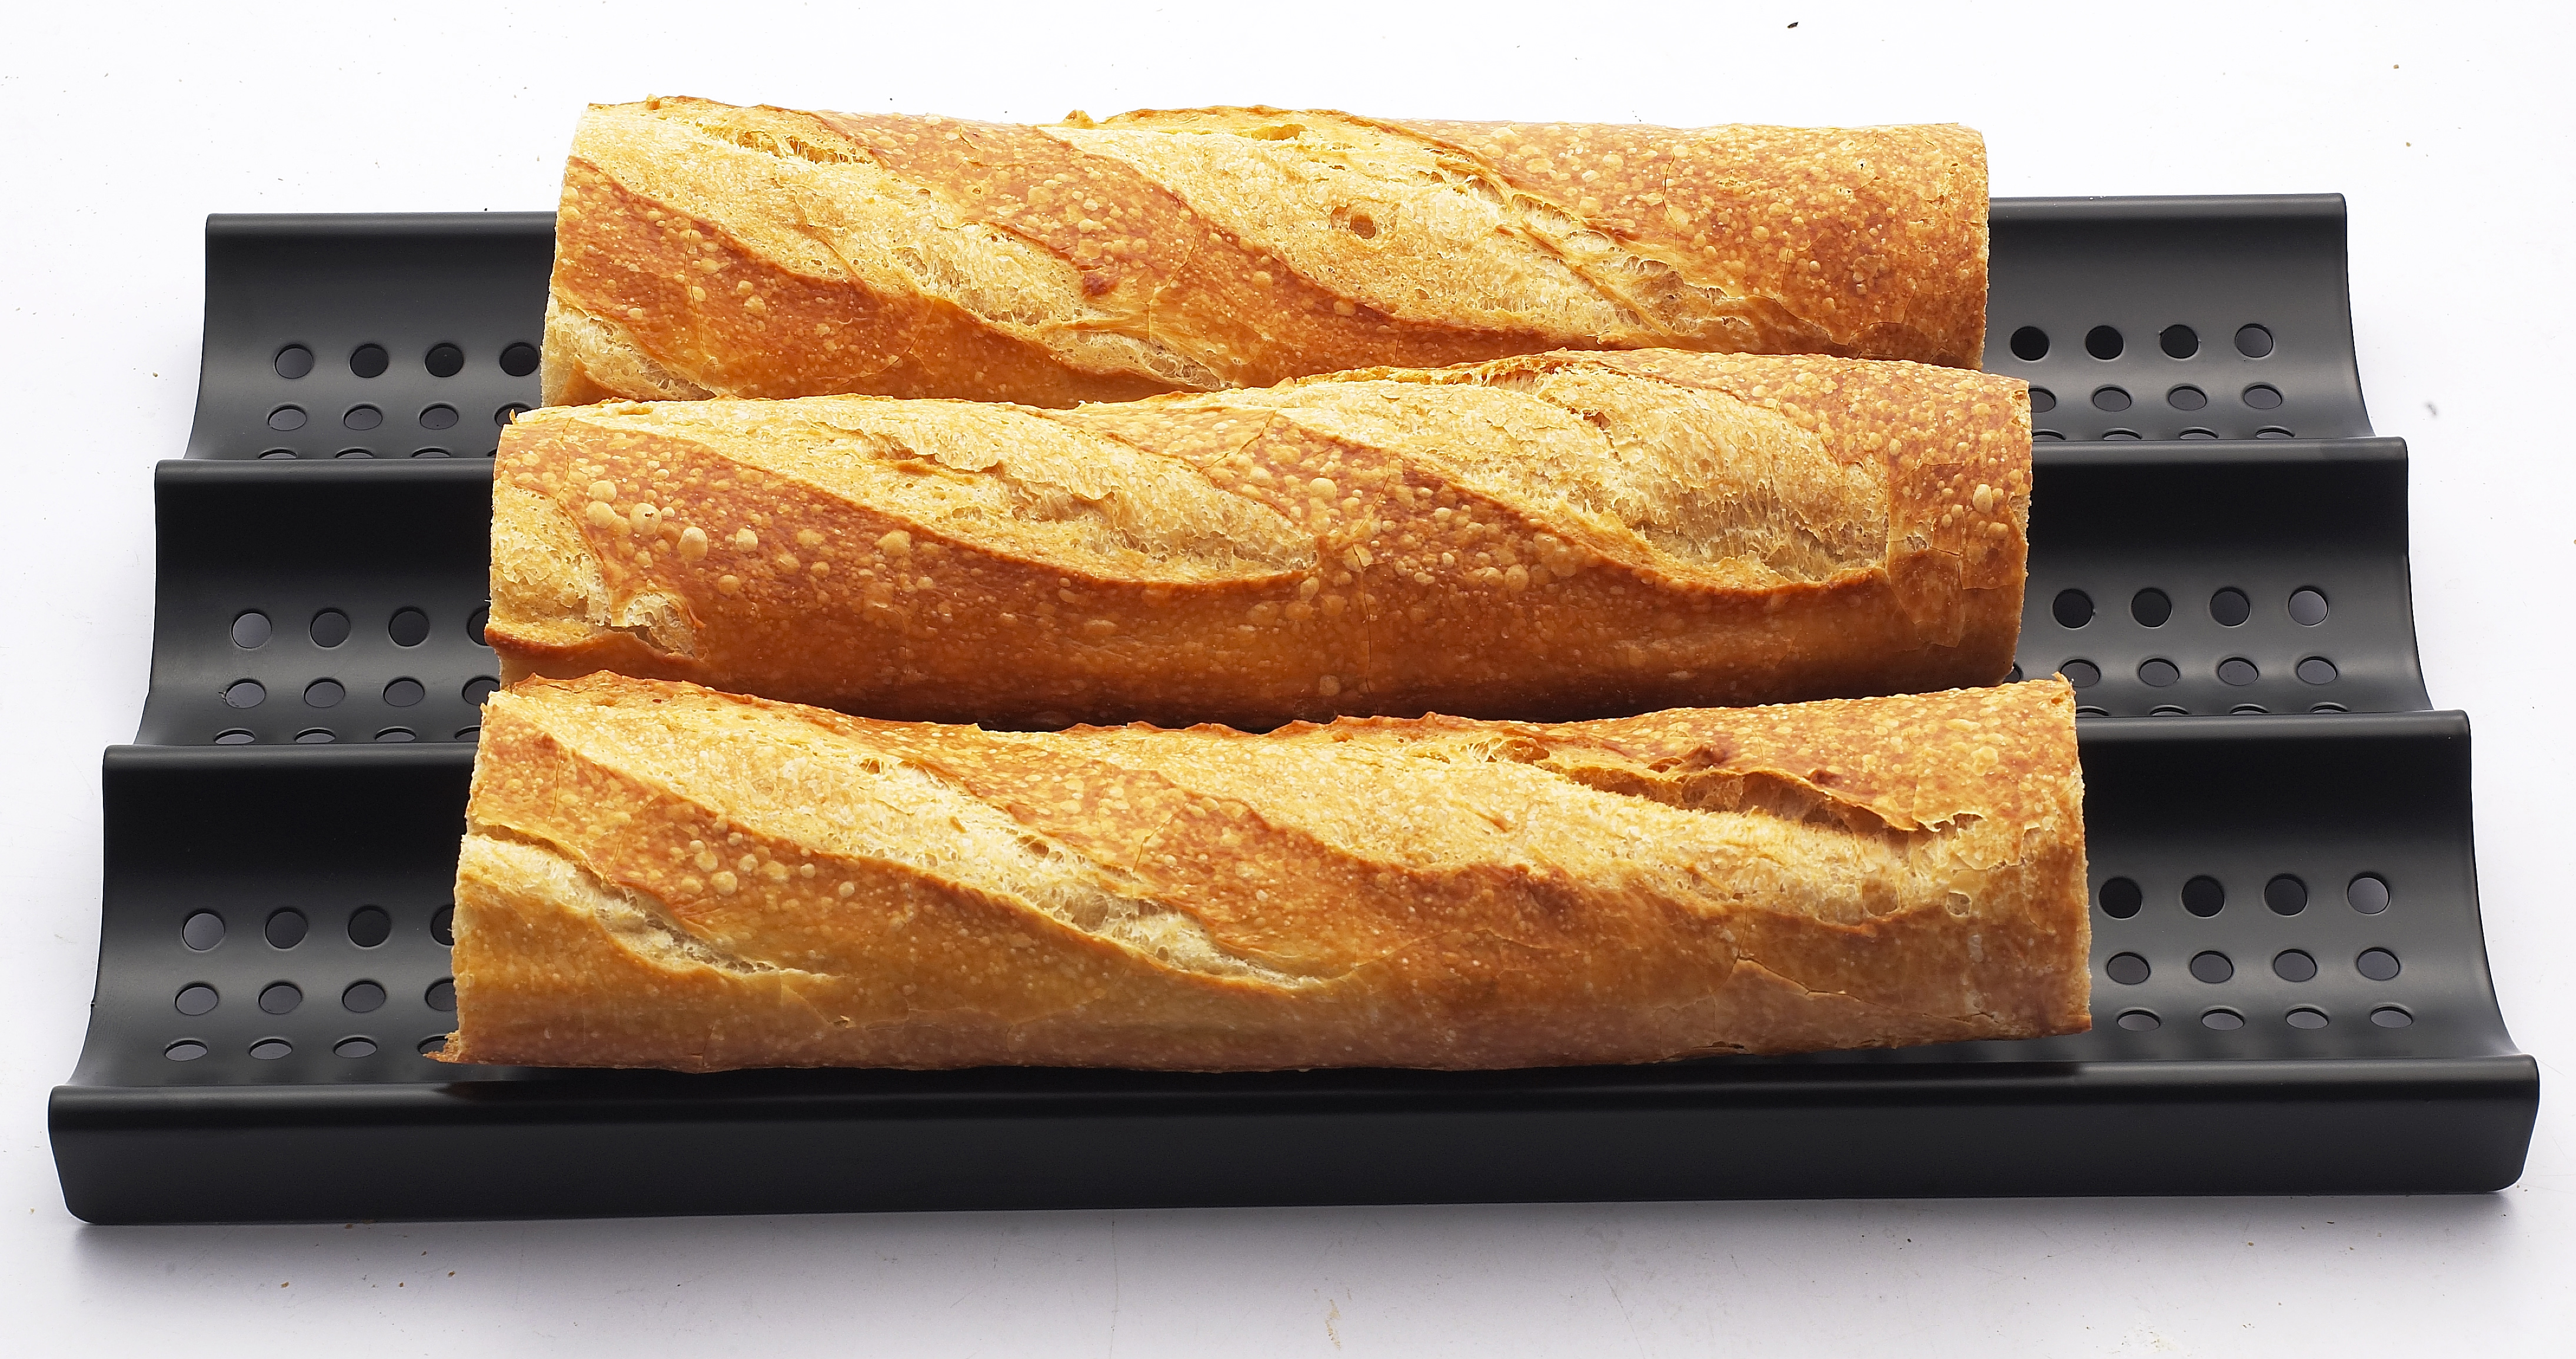 BBQ 870002 3-Loaf Perforated Baguette French Bread Pan, Nonstick, 16 by 9-Inches